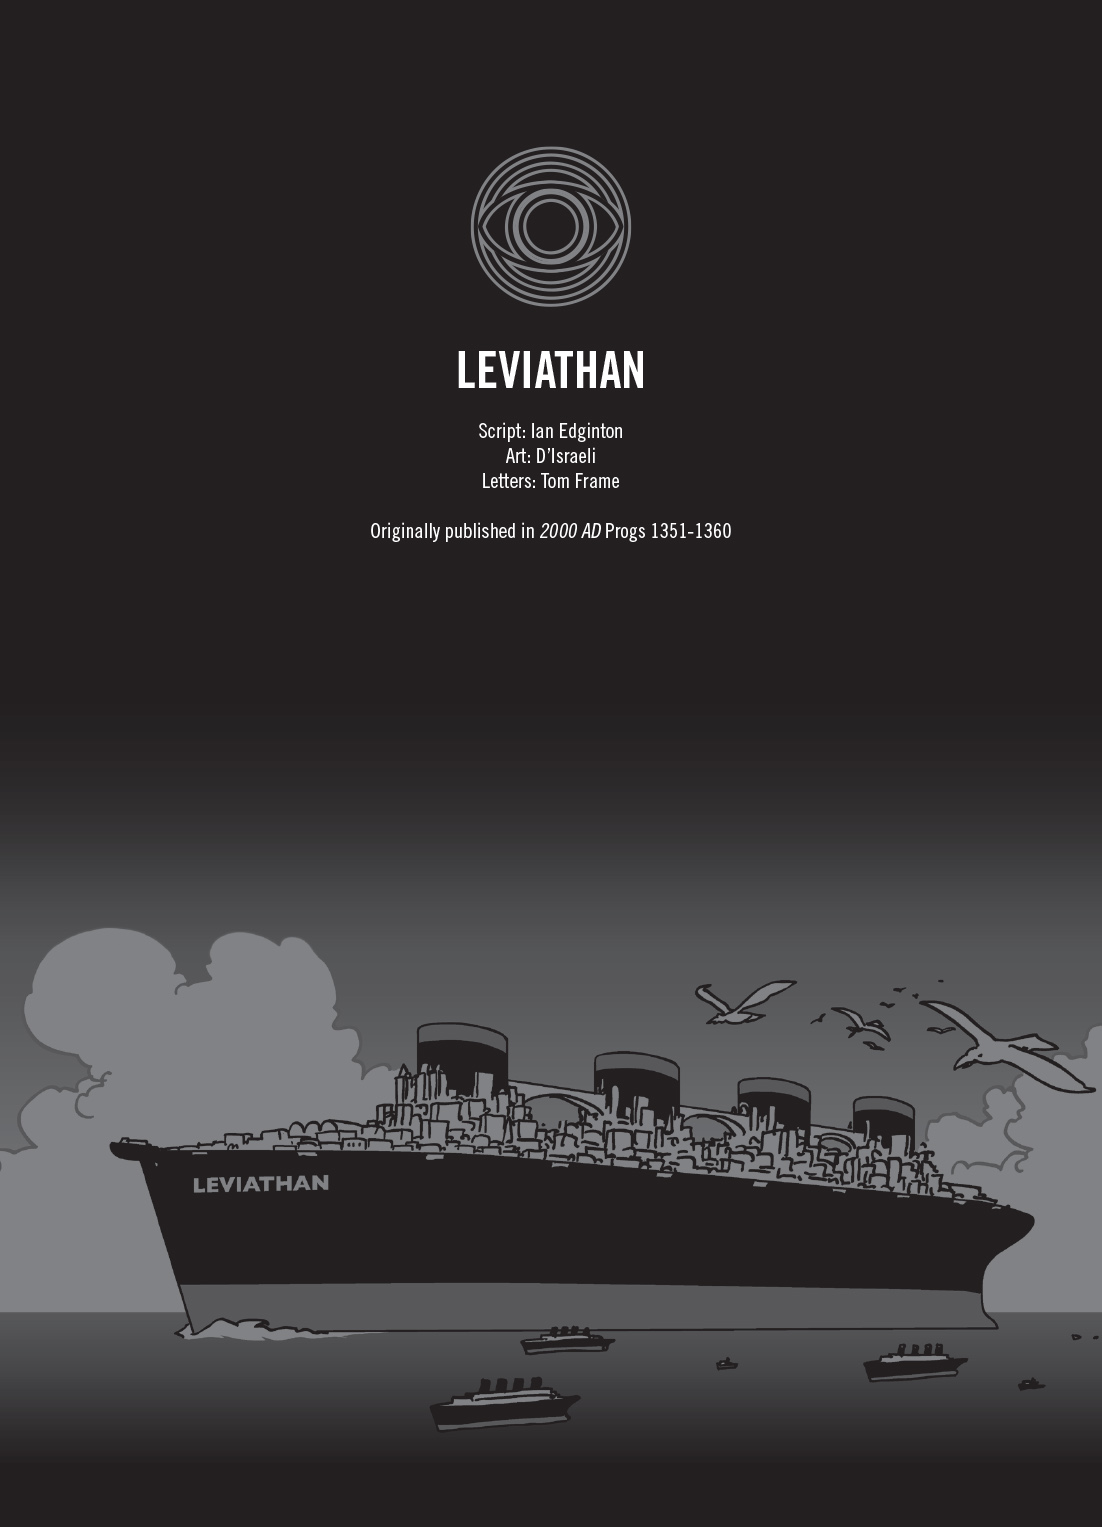 Read online Leviathan (2000 AD) comic -  Issue # TPB - 6